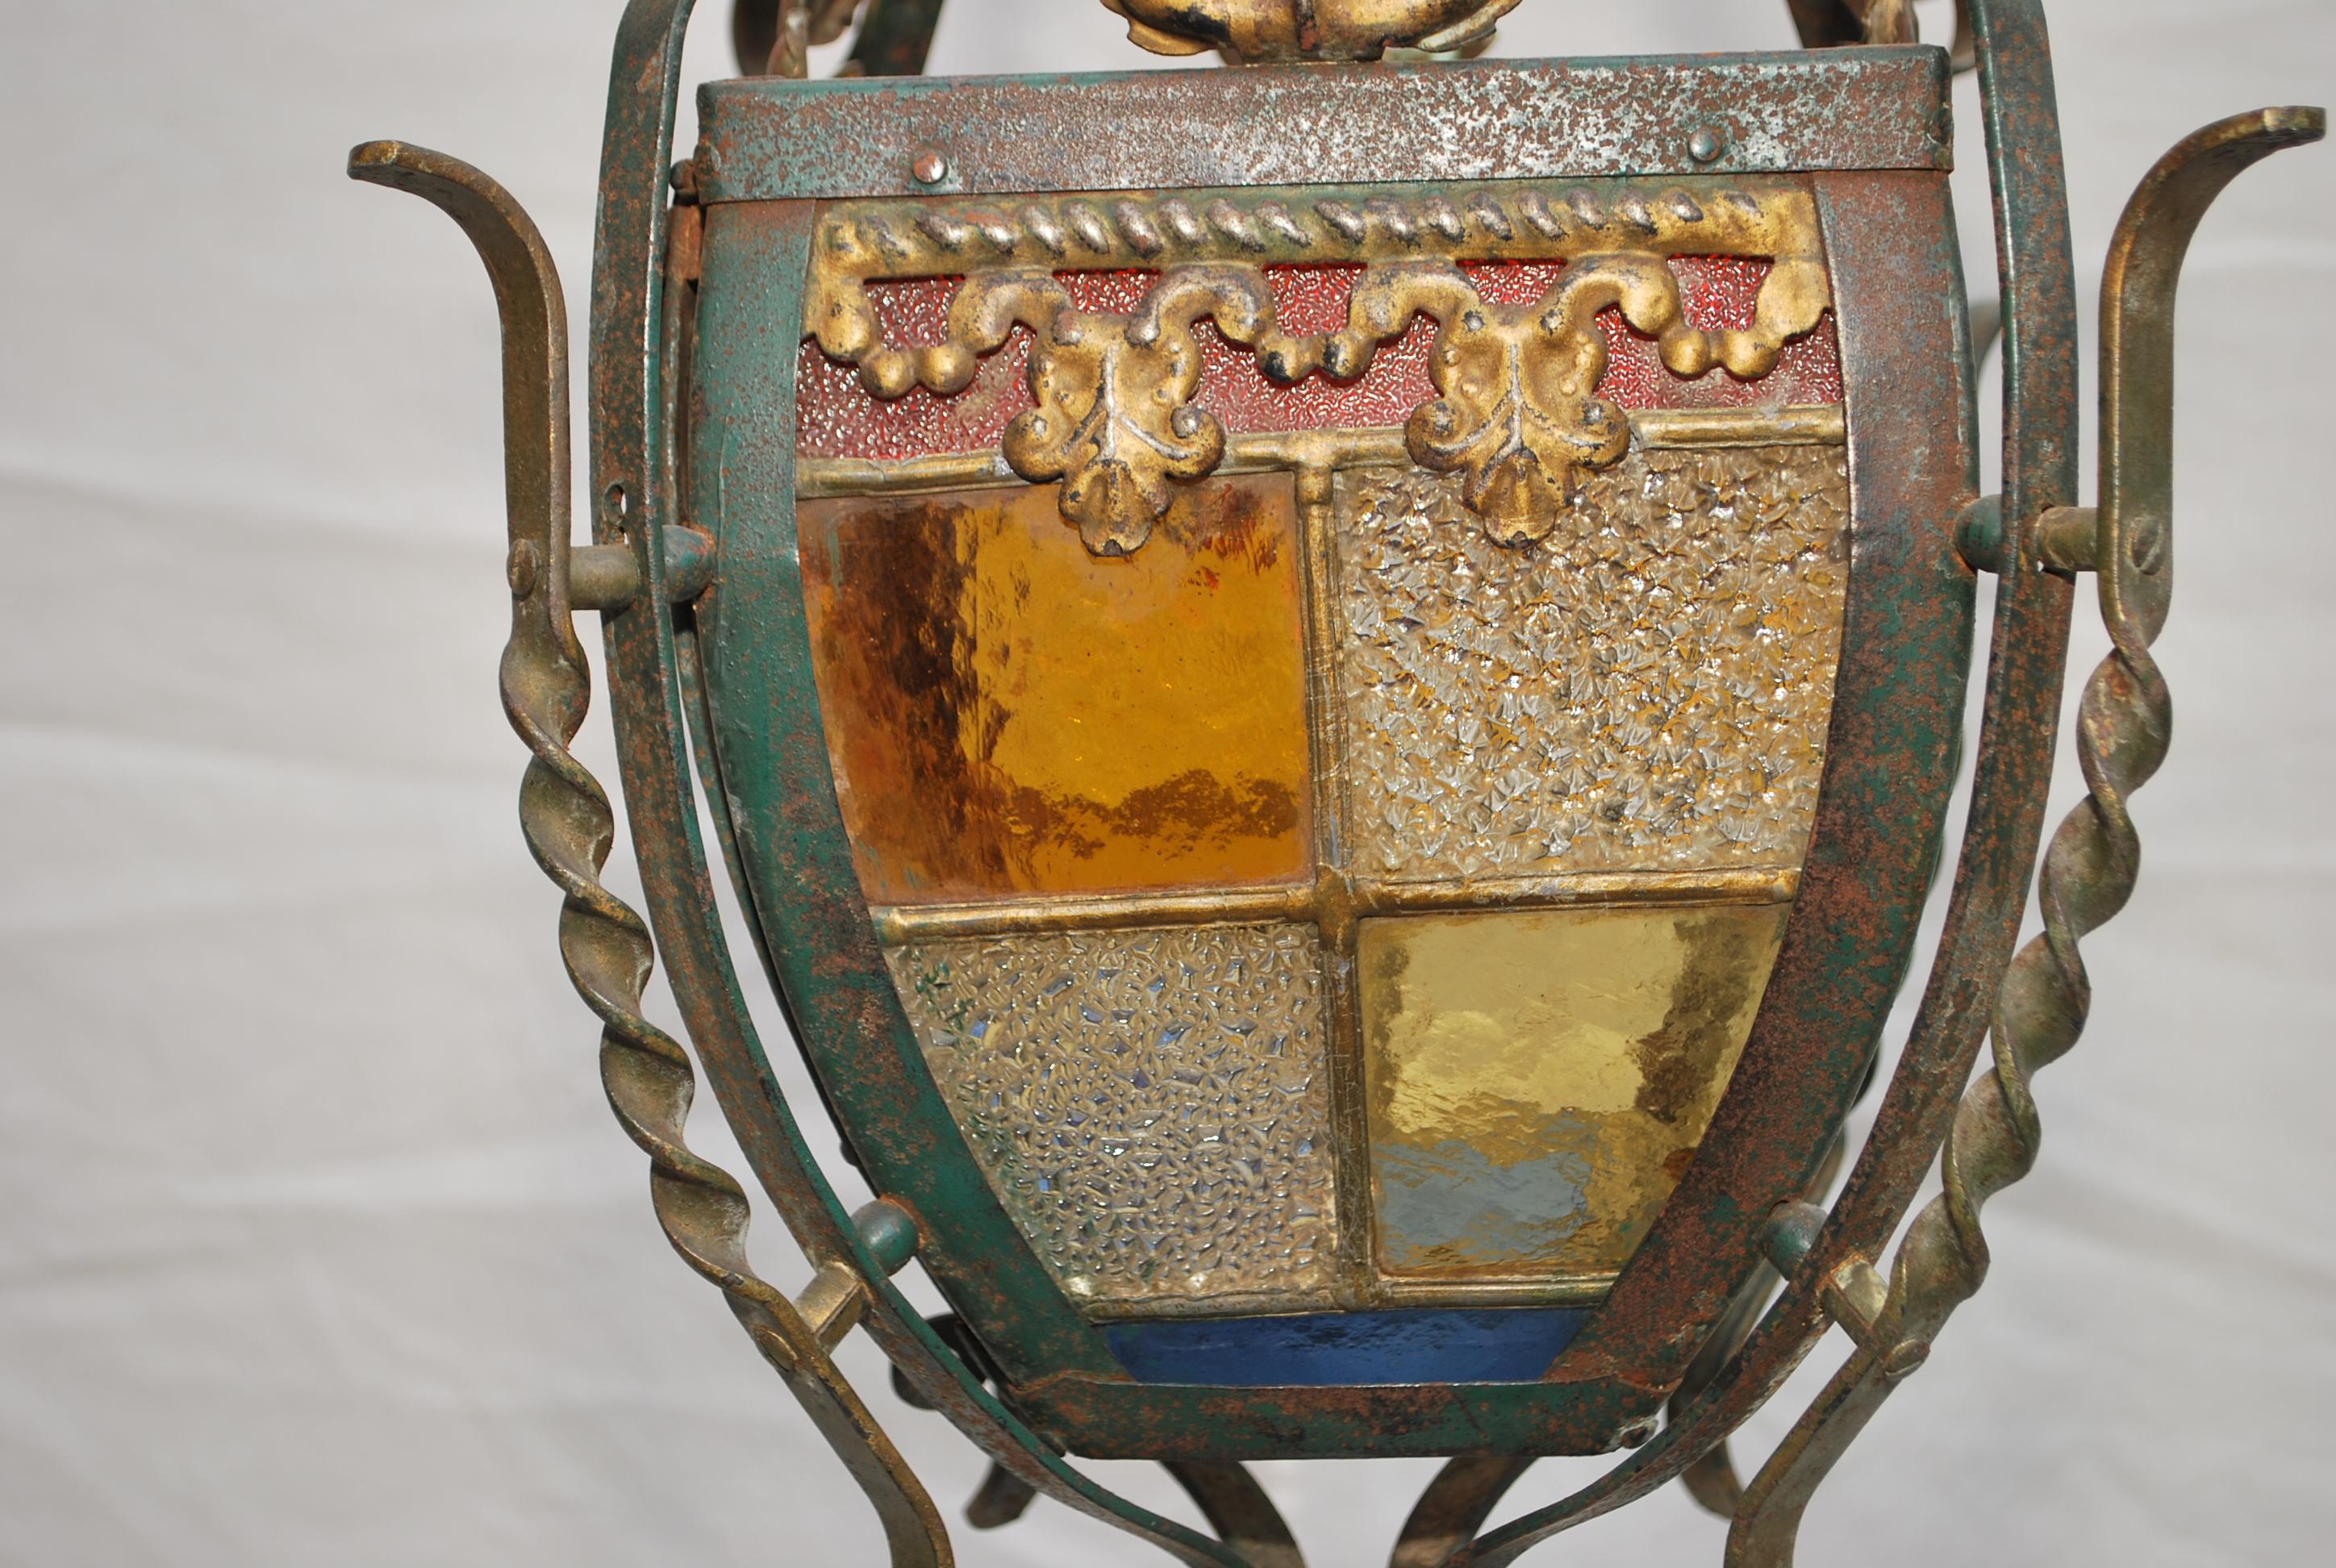  A beautiful 1920's lantern, the glass is beautiful, the patina is nicer in person